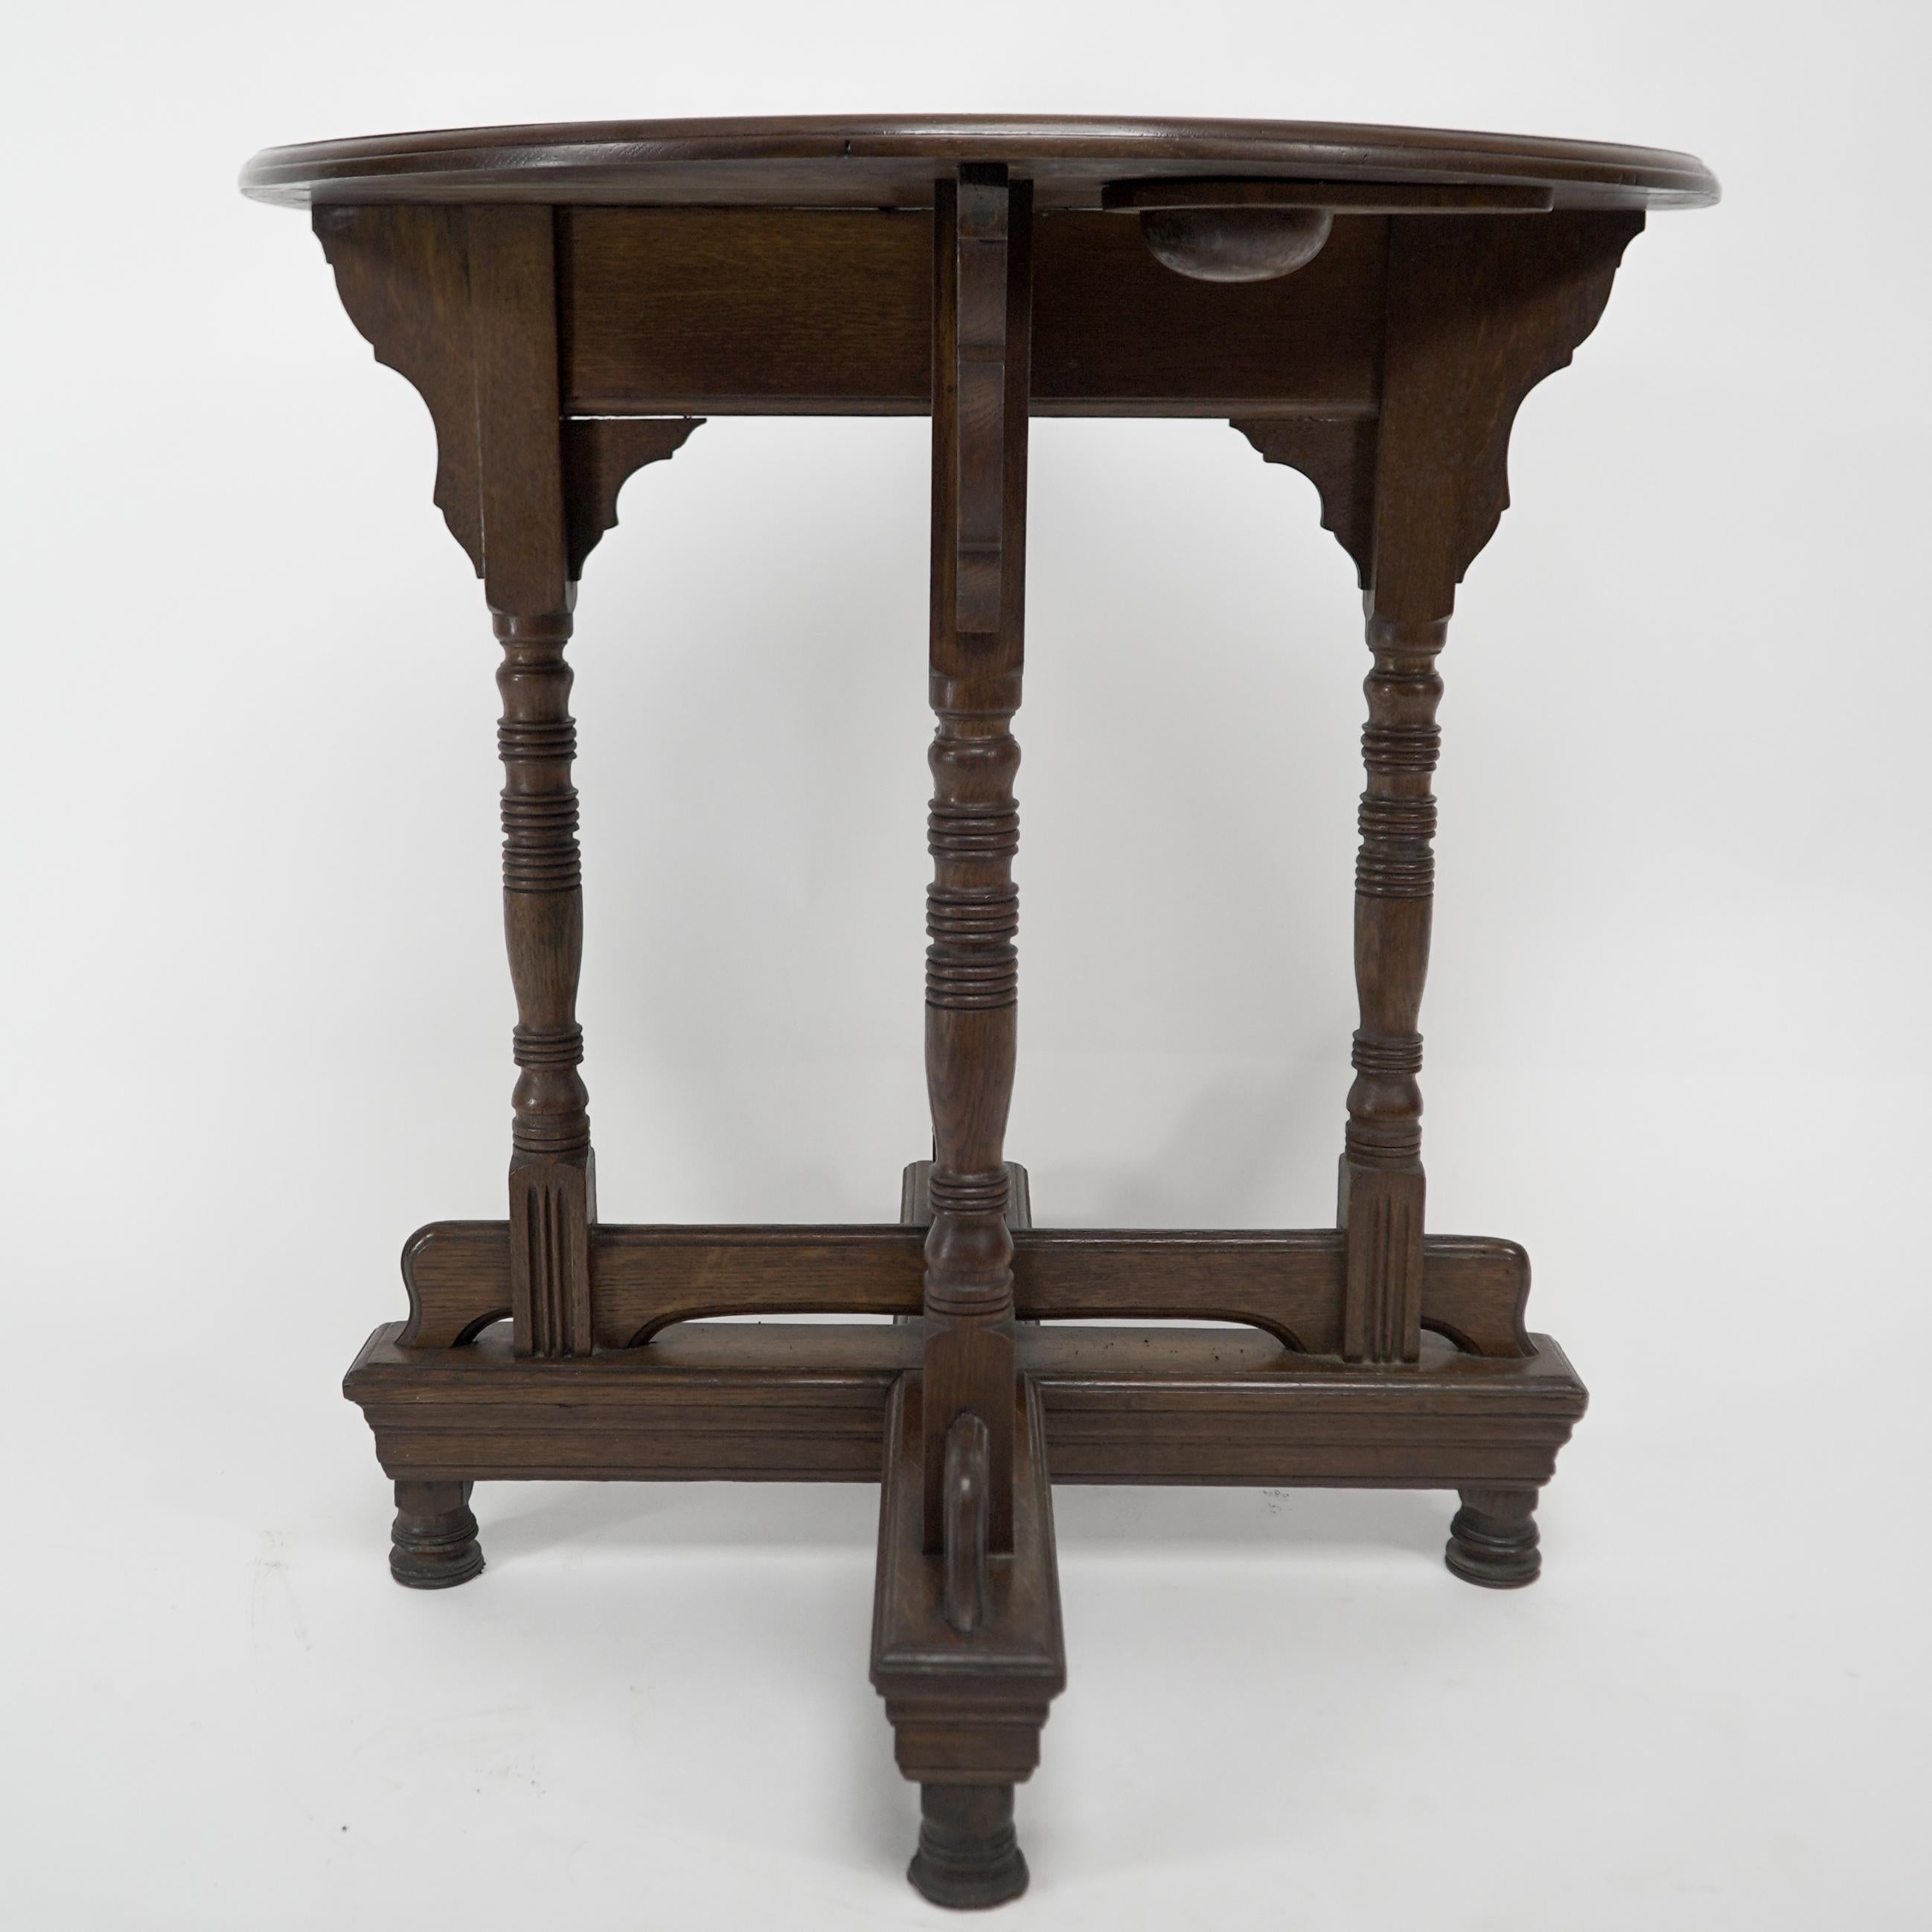 English Alfred Waterhouse. A Gothic Revival oak side table with double cross stretchers. For Sale